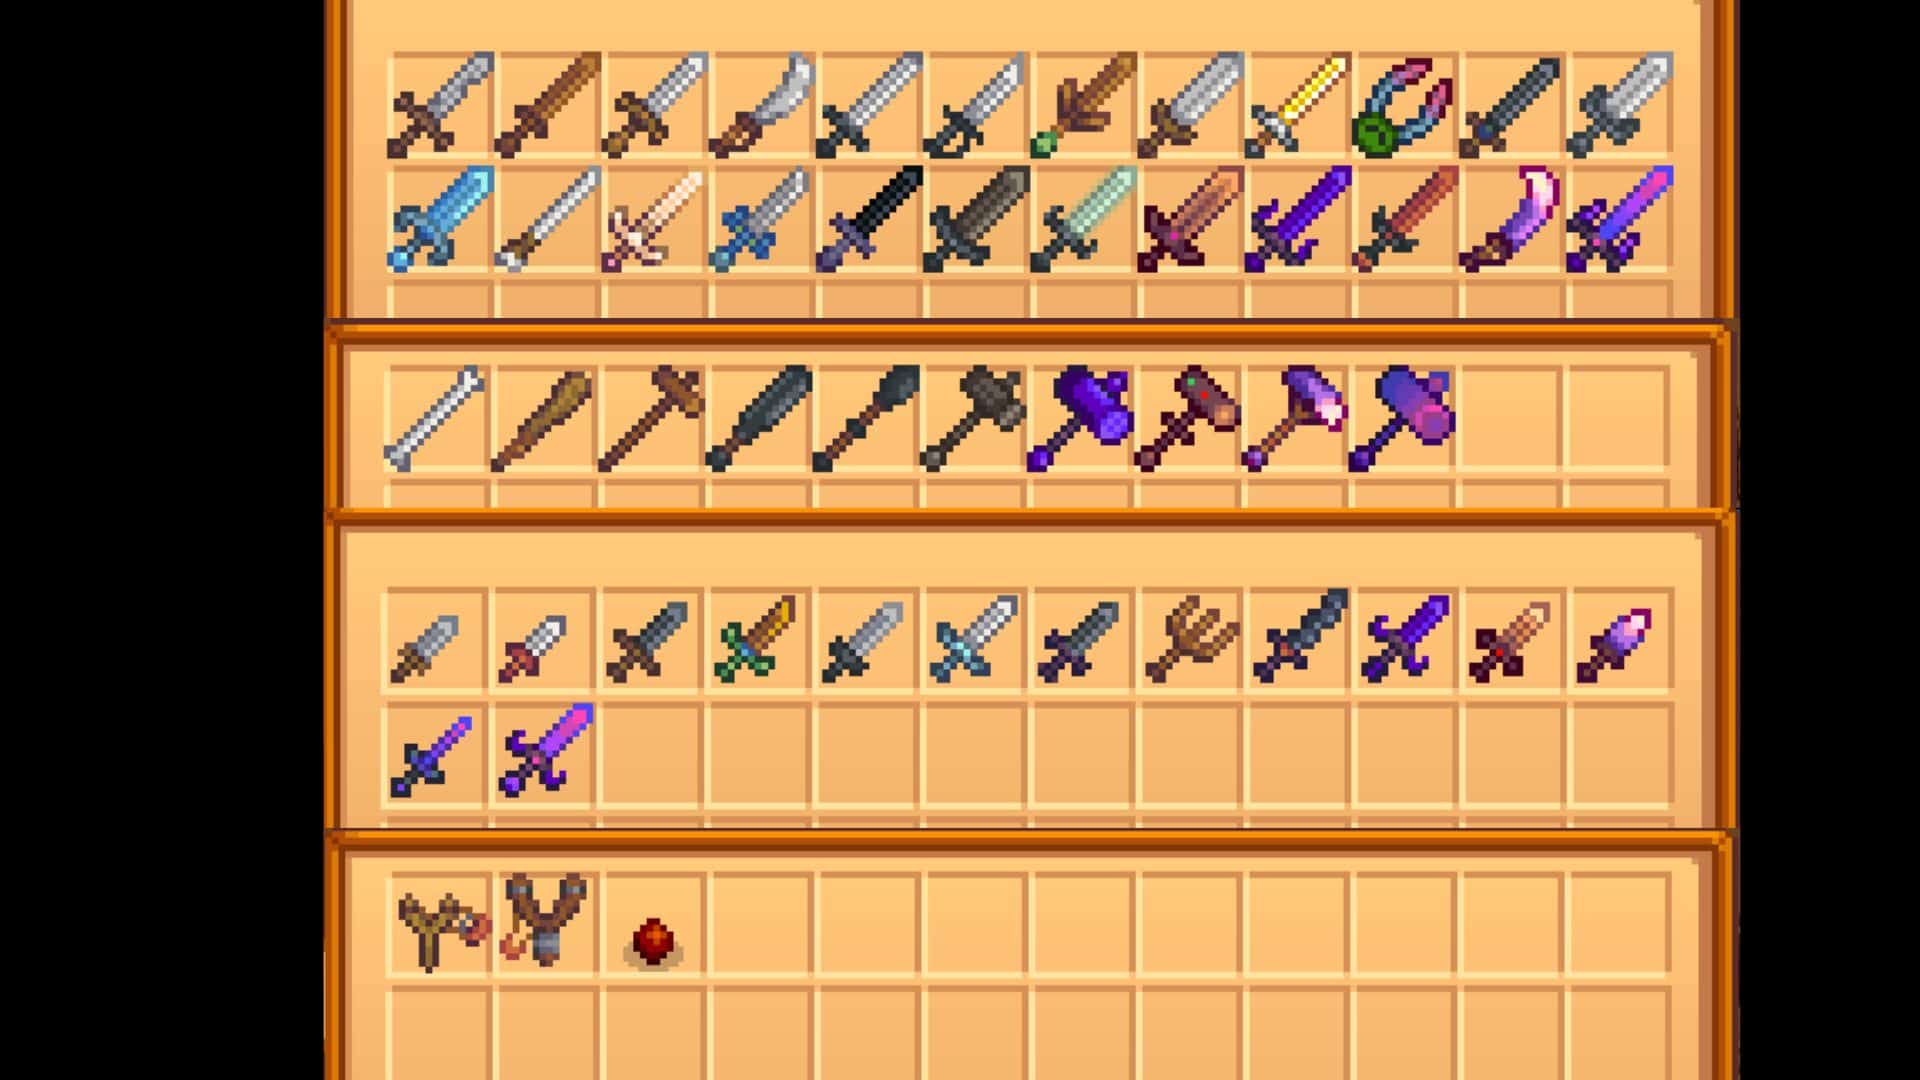 Weapons in stardew valley